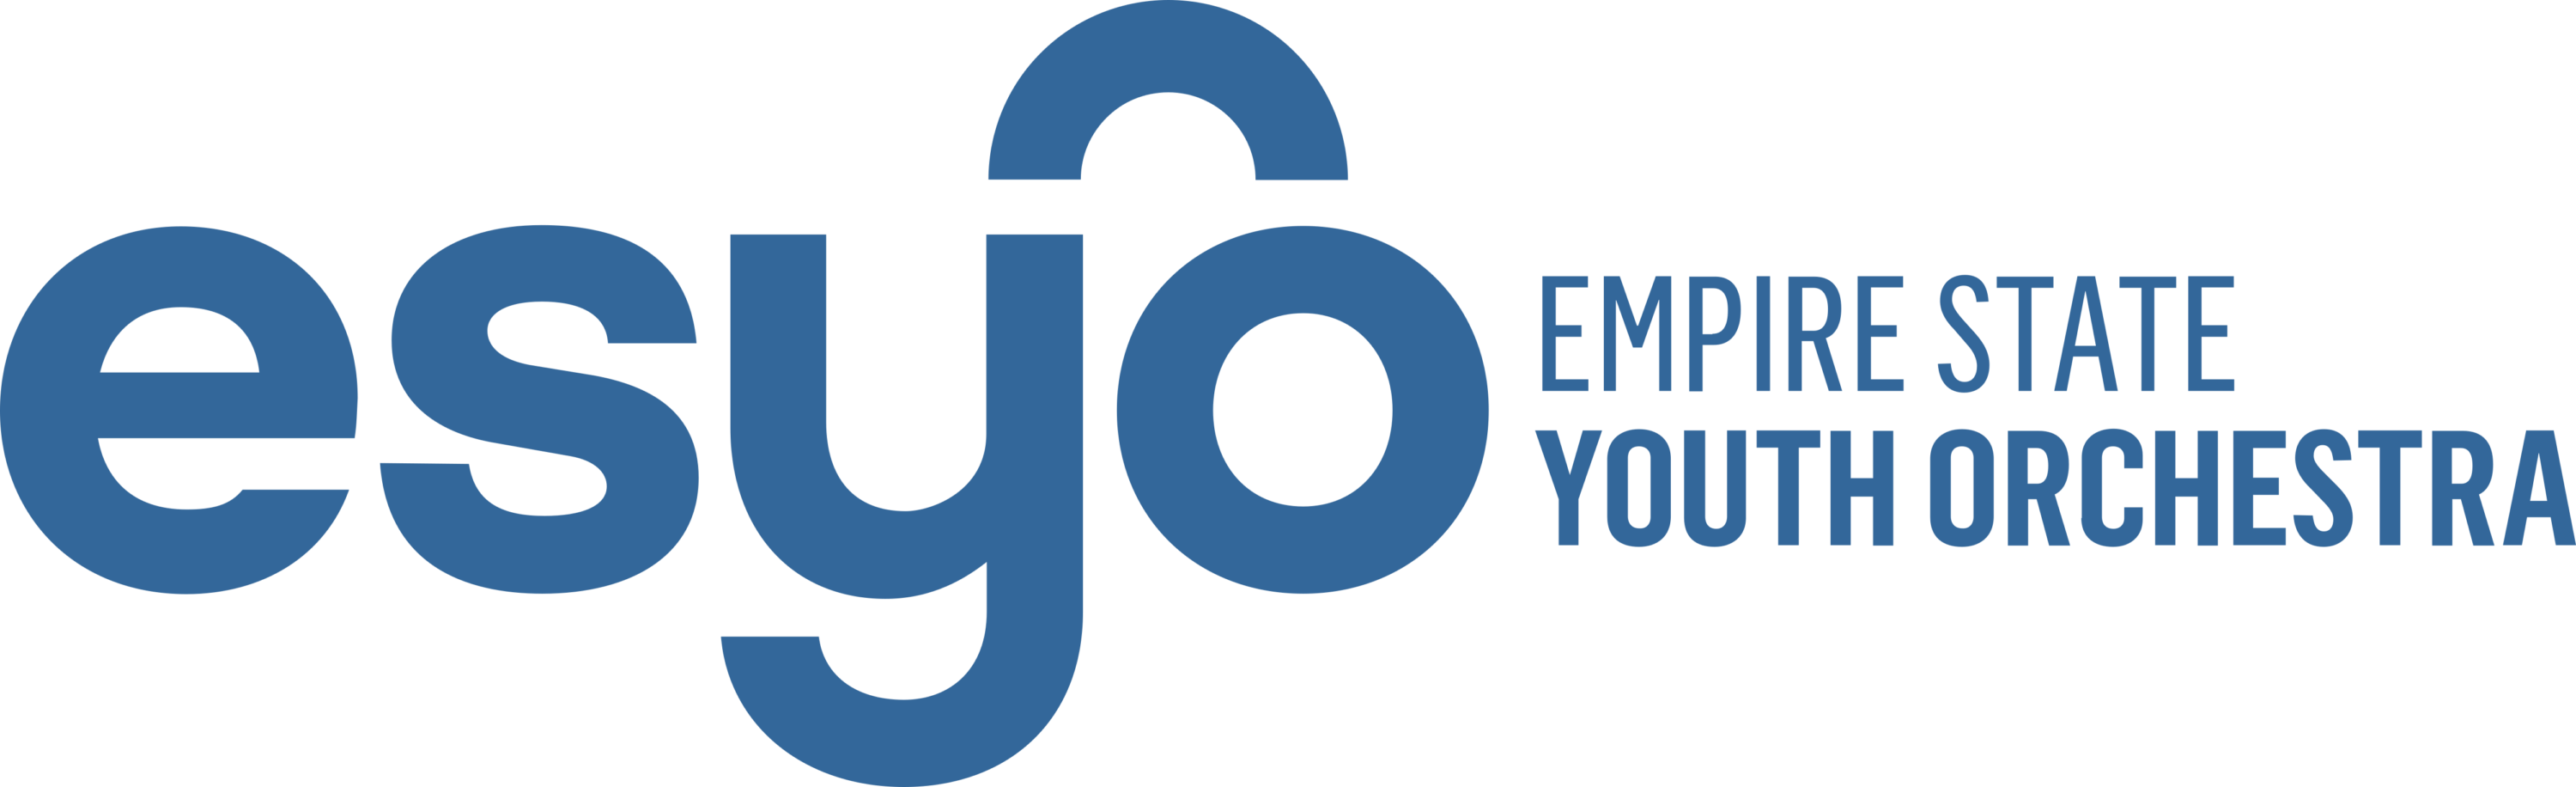 Empire State Youth Orchestra Logo